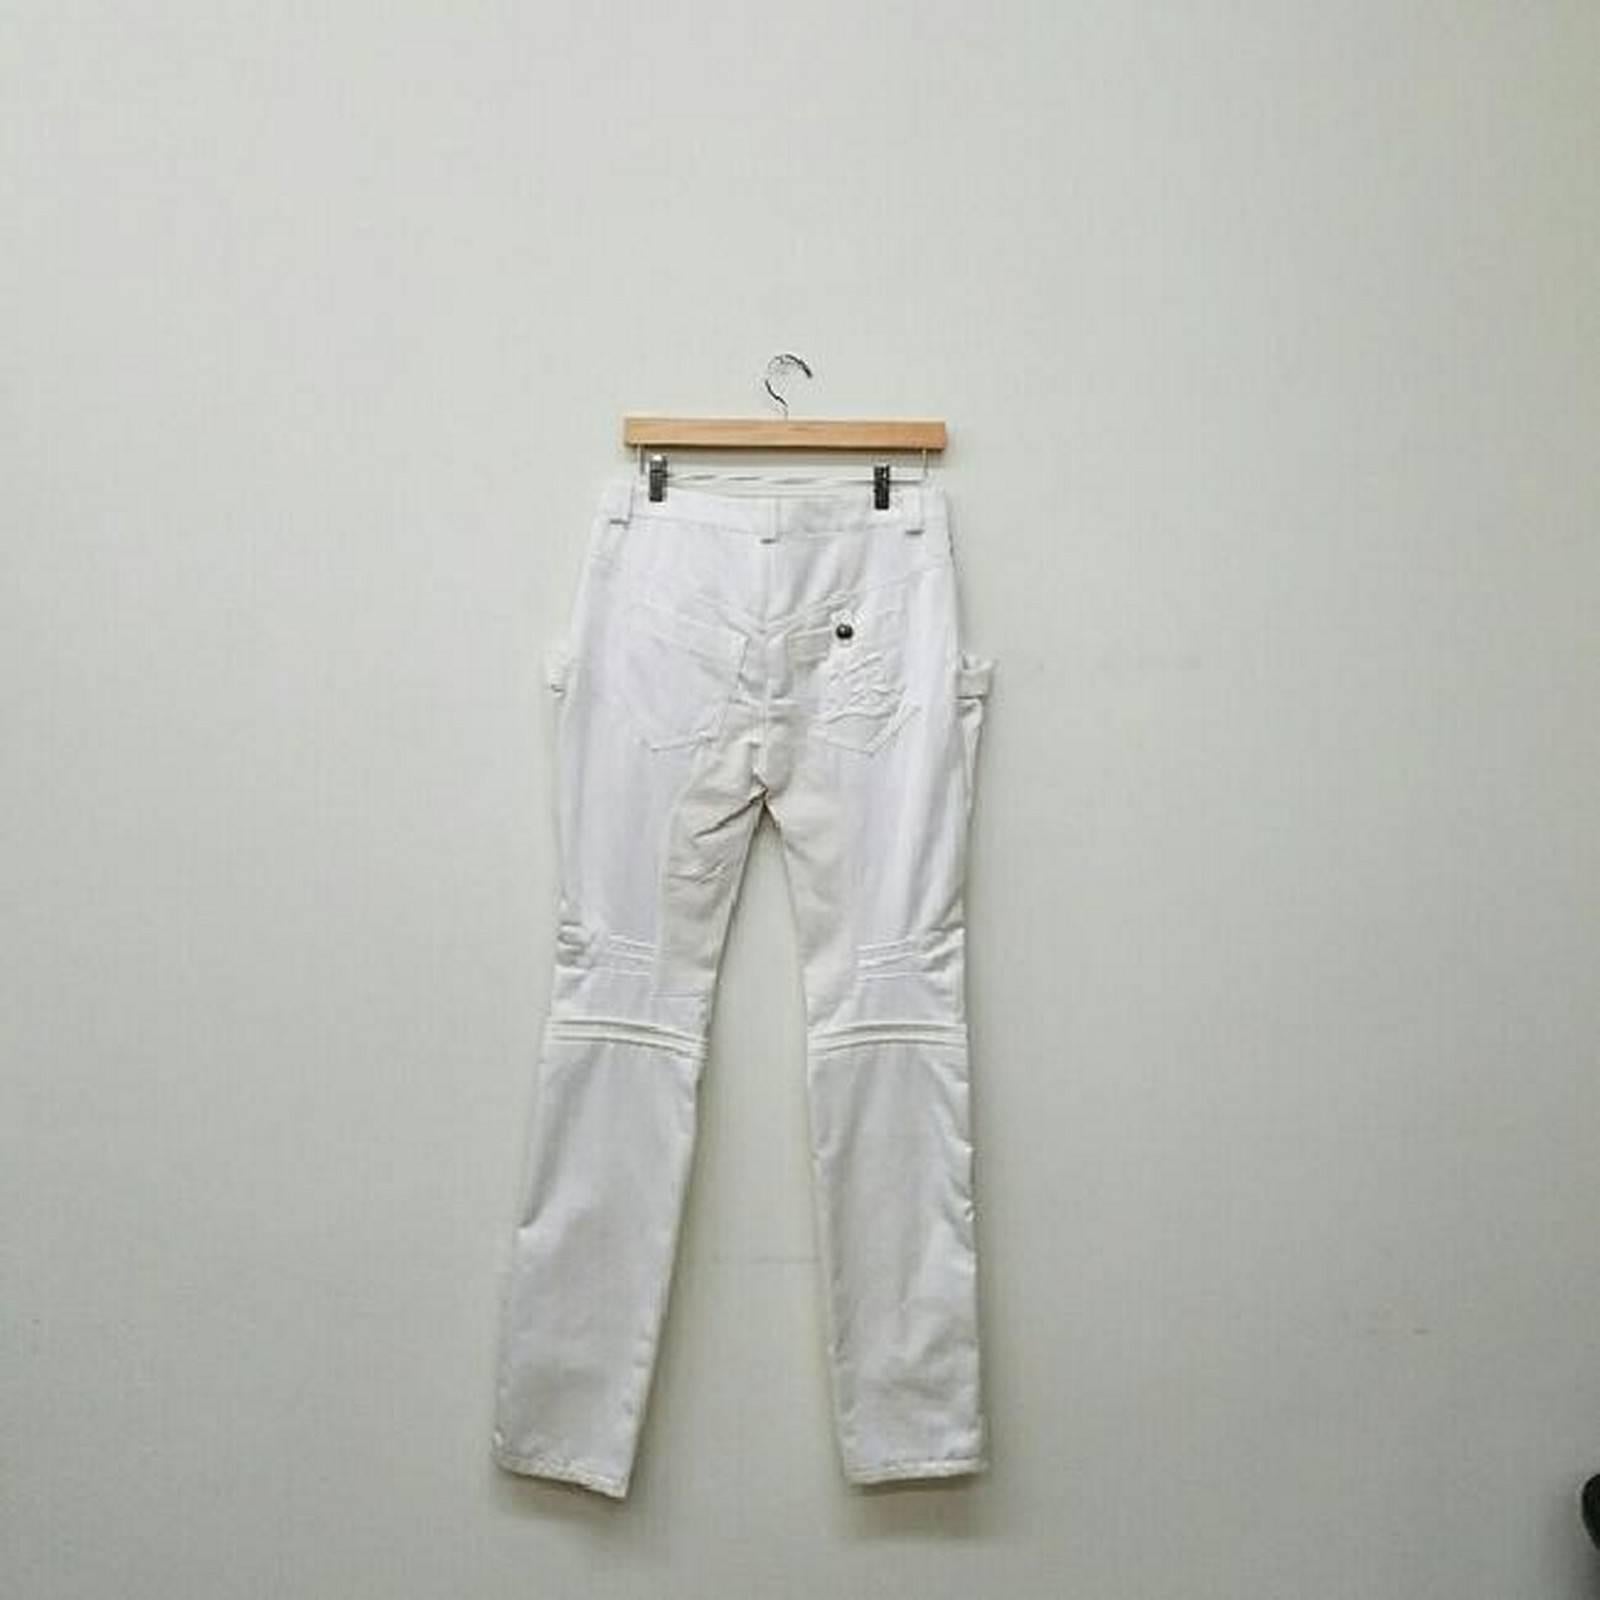 Balenciaga Paris Casual Pants

Brand new. Never used. Tags still attached. MADE IN FRANCE.

Type:Pants
Size:16 (XL, Plus 0x)
Color:White
Brand:Balenciaga
Style/Collection:Balenciaga Paris Casual Pants